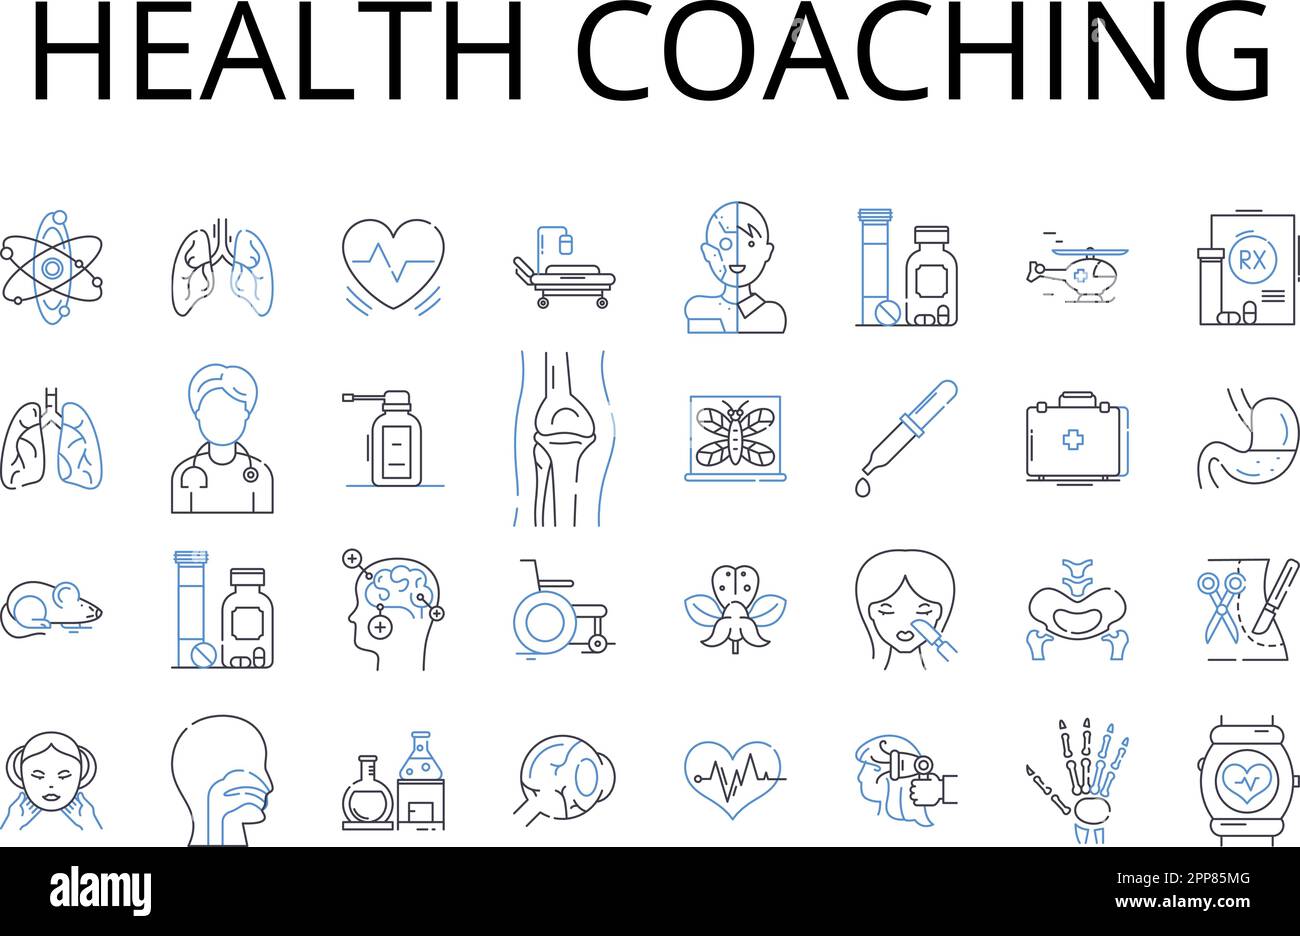 Health coaching line icons collection. Wellness coaching, Personal training, Fitness guidance, Nutrition coaching, Lifestyle coaching, Health Stock Vector